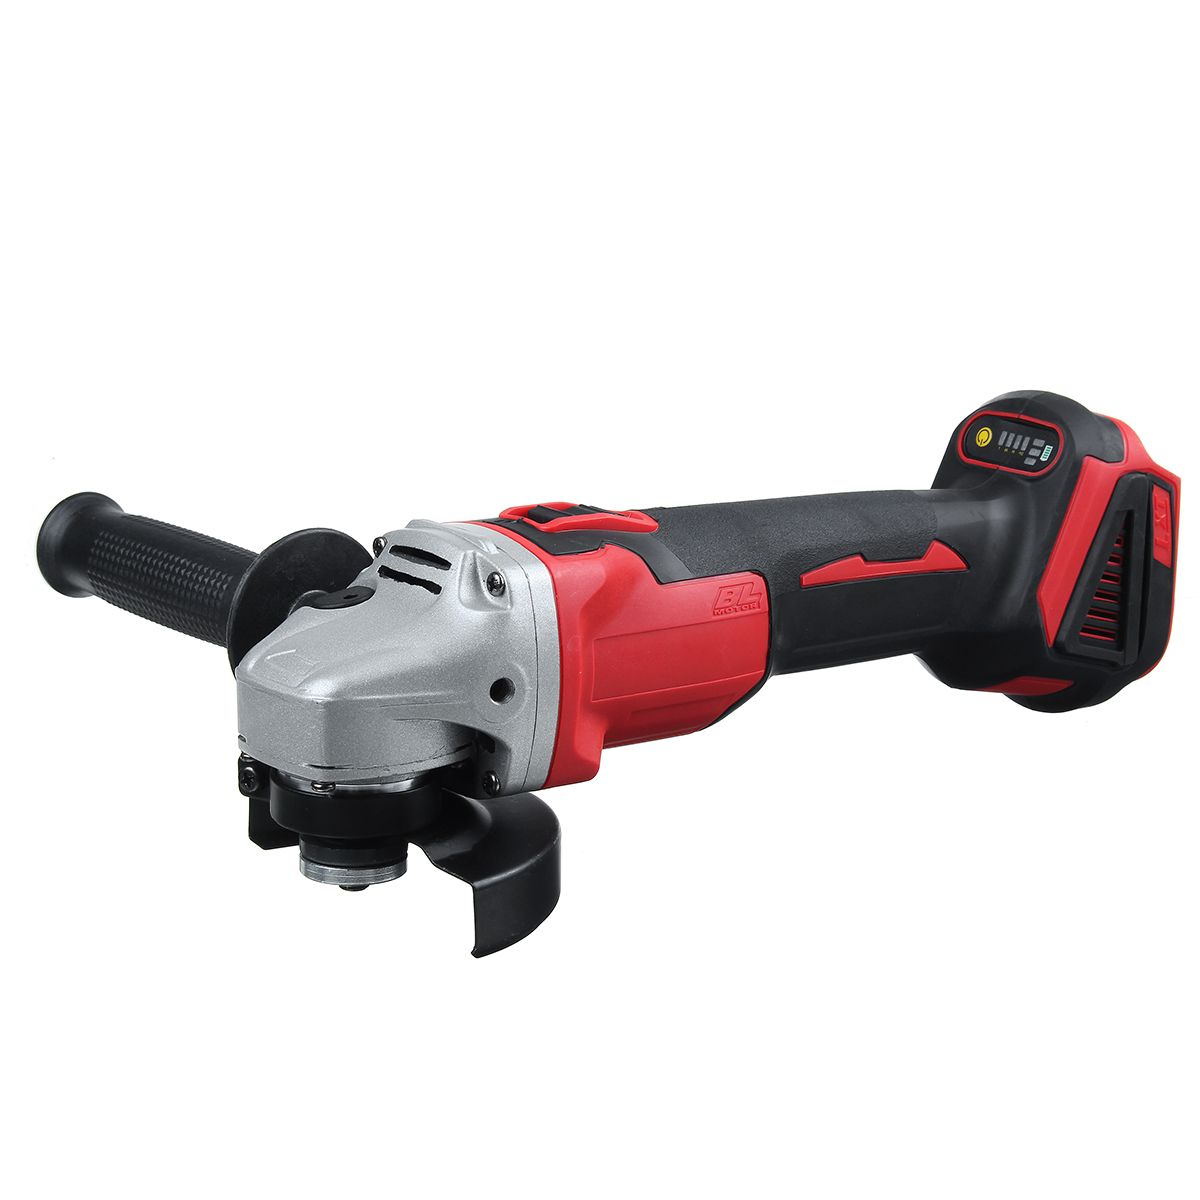 860W-4-Speeds-Brushless-Electric-Angle-Grinder-11000rpm-Heavy-Duty-Cutting-Grinding-Tool-For-Makita--1740227